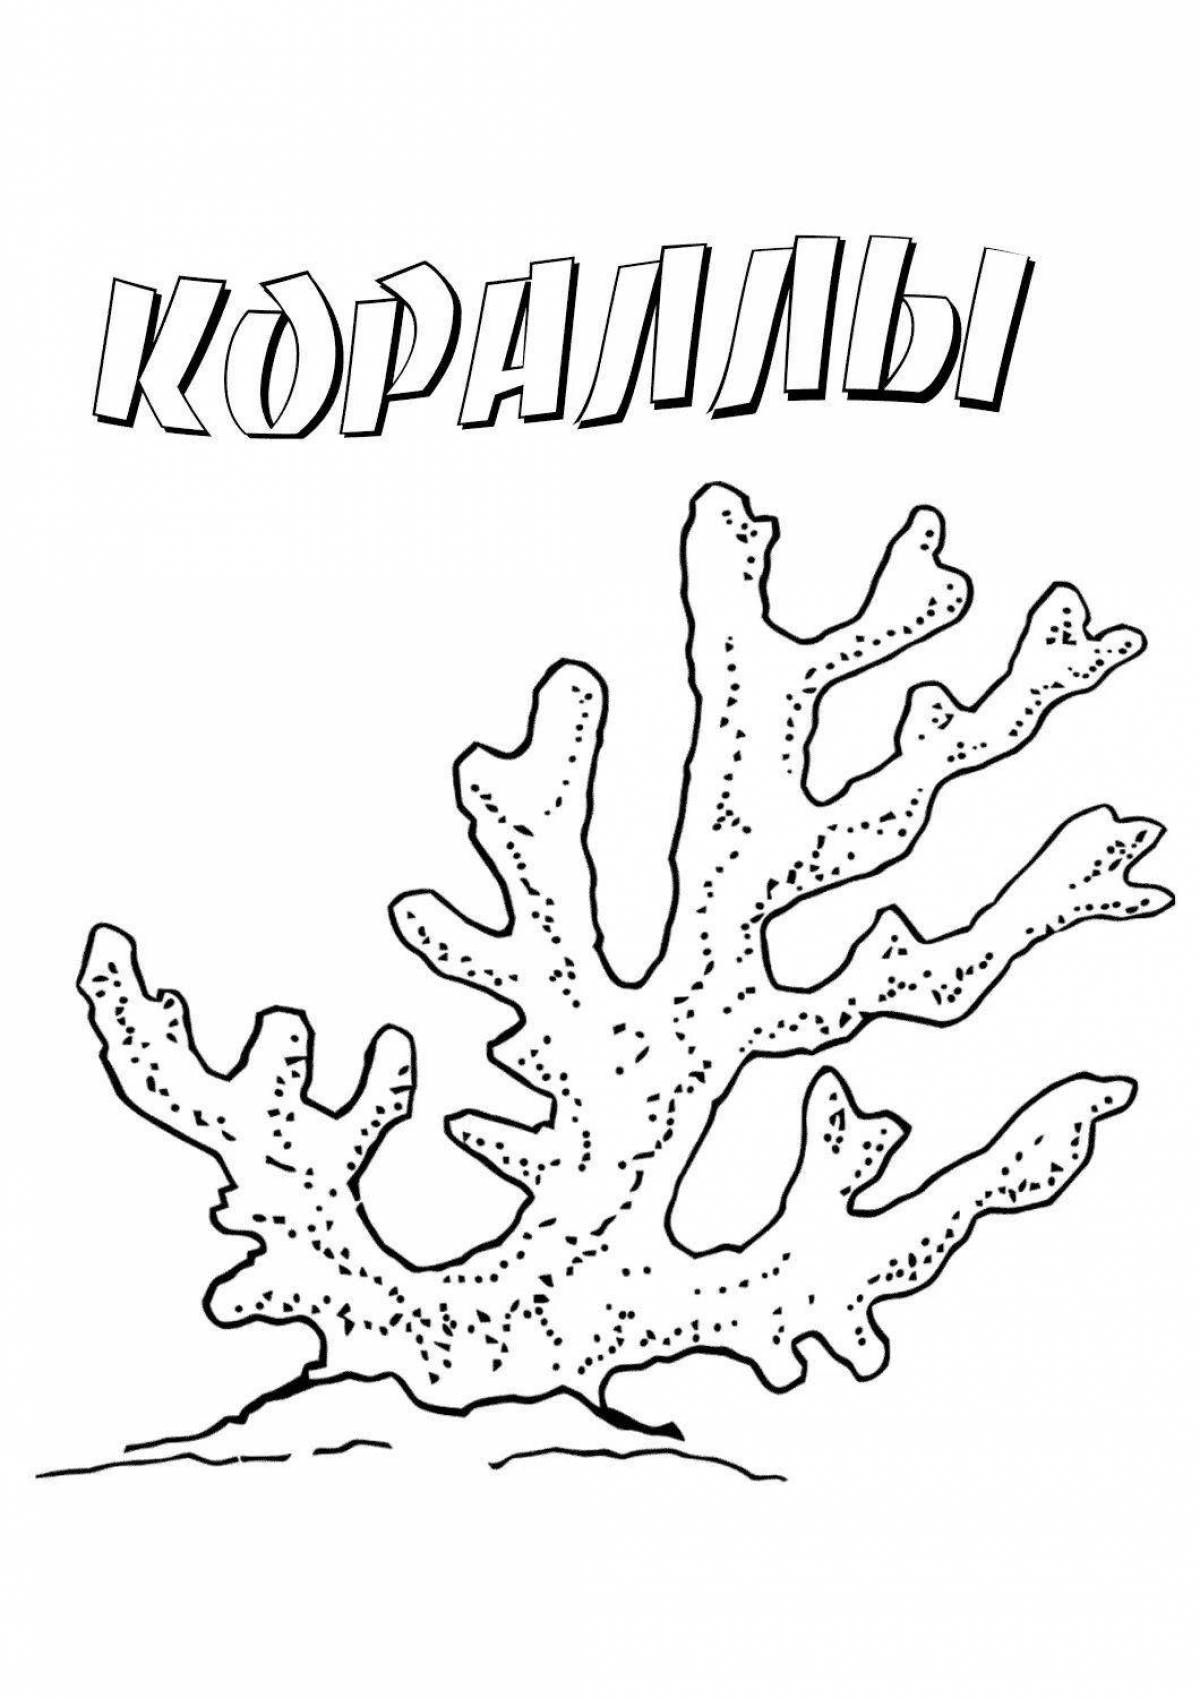 Seaweed coloring page for kids